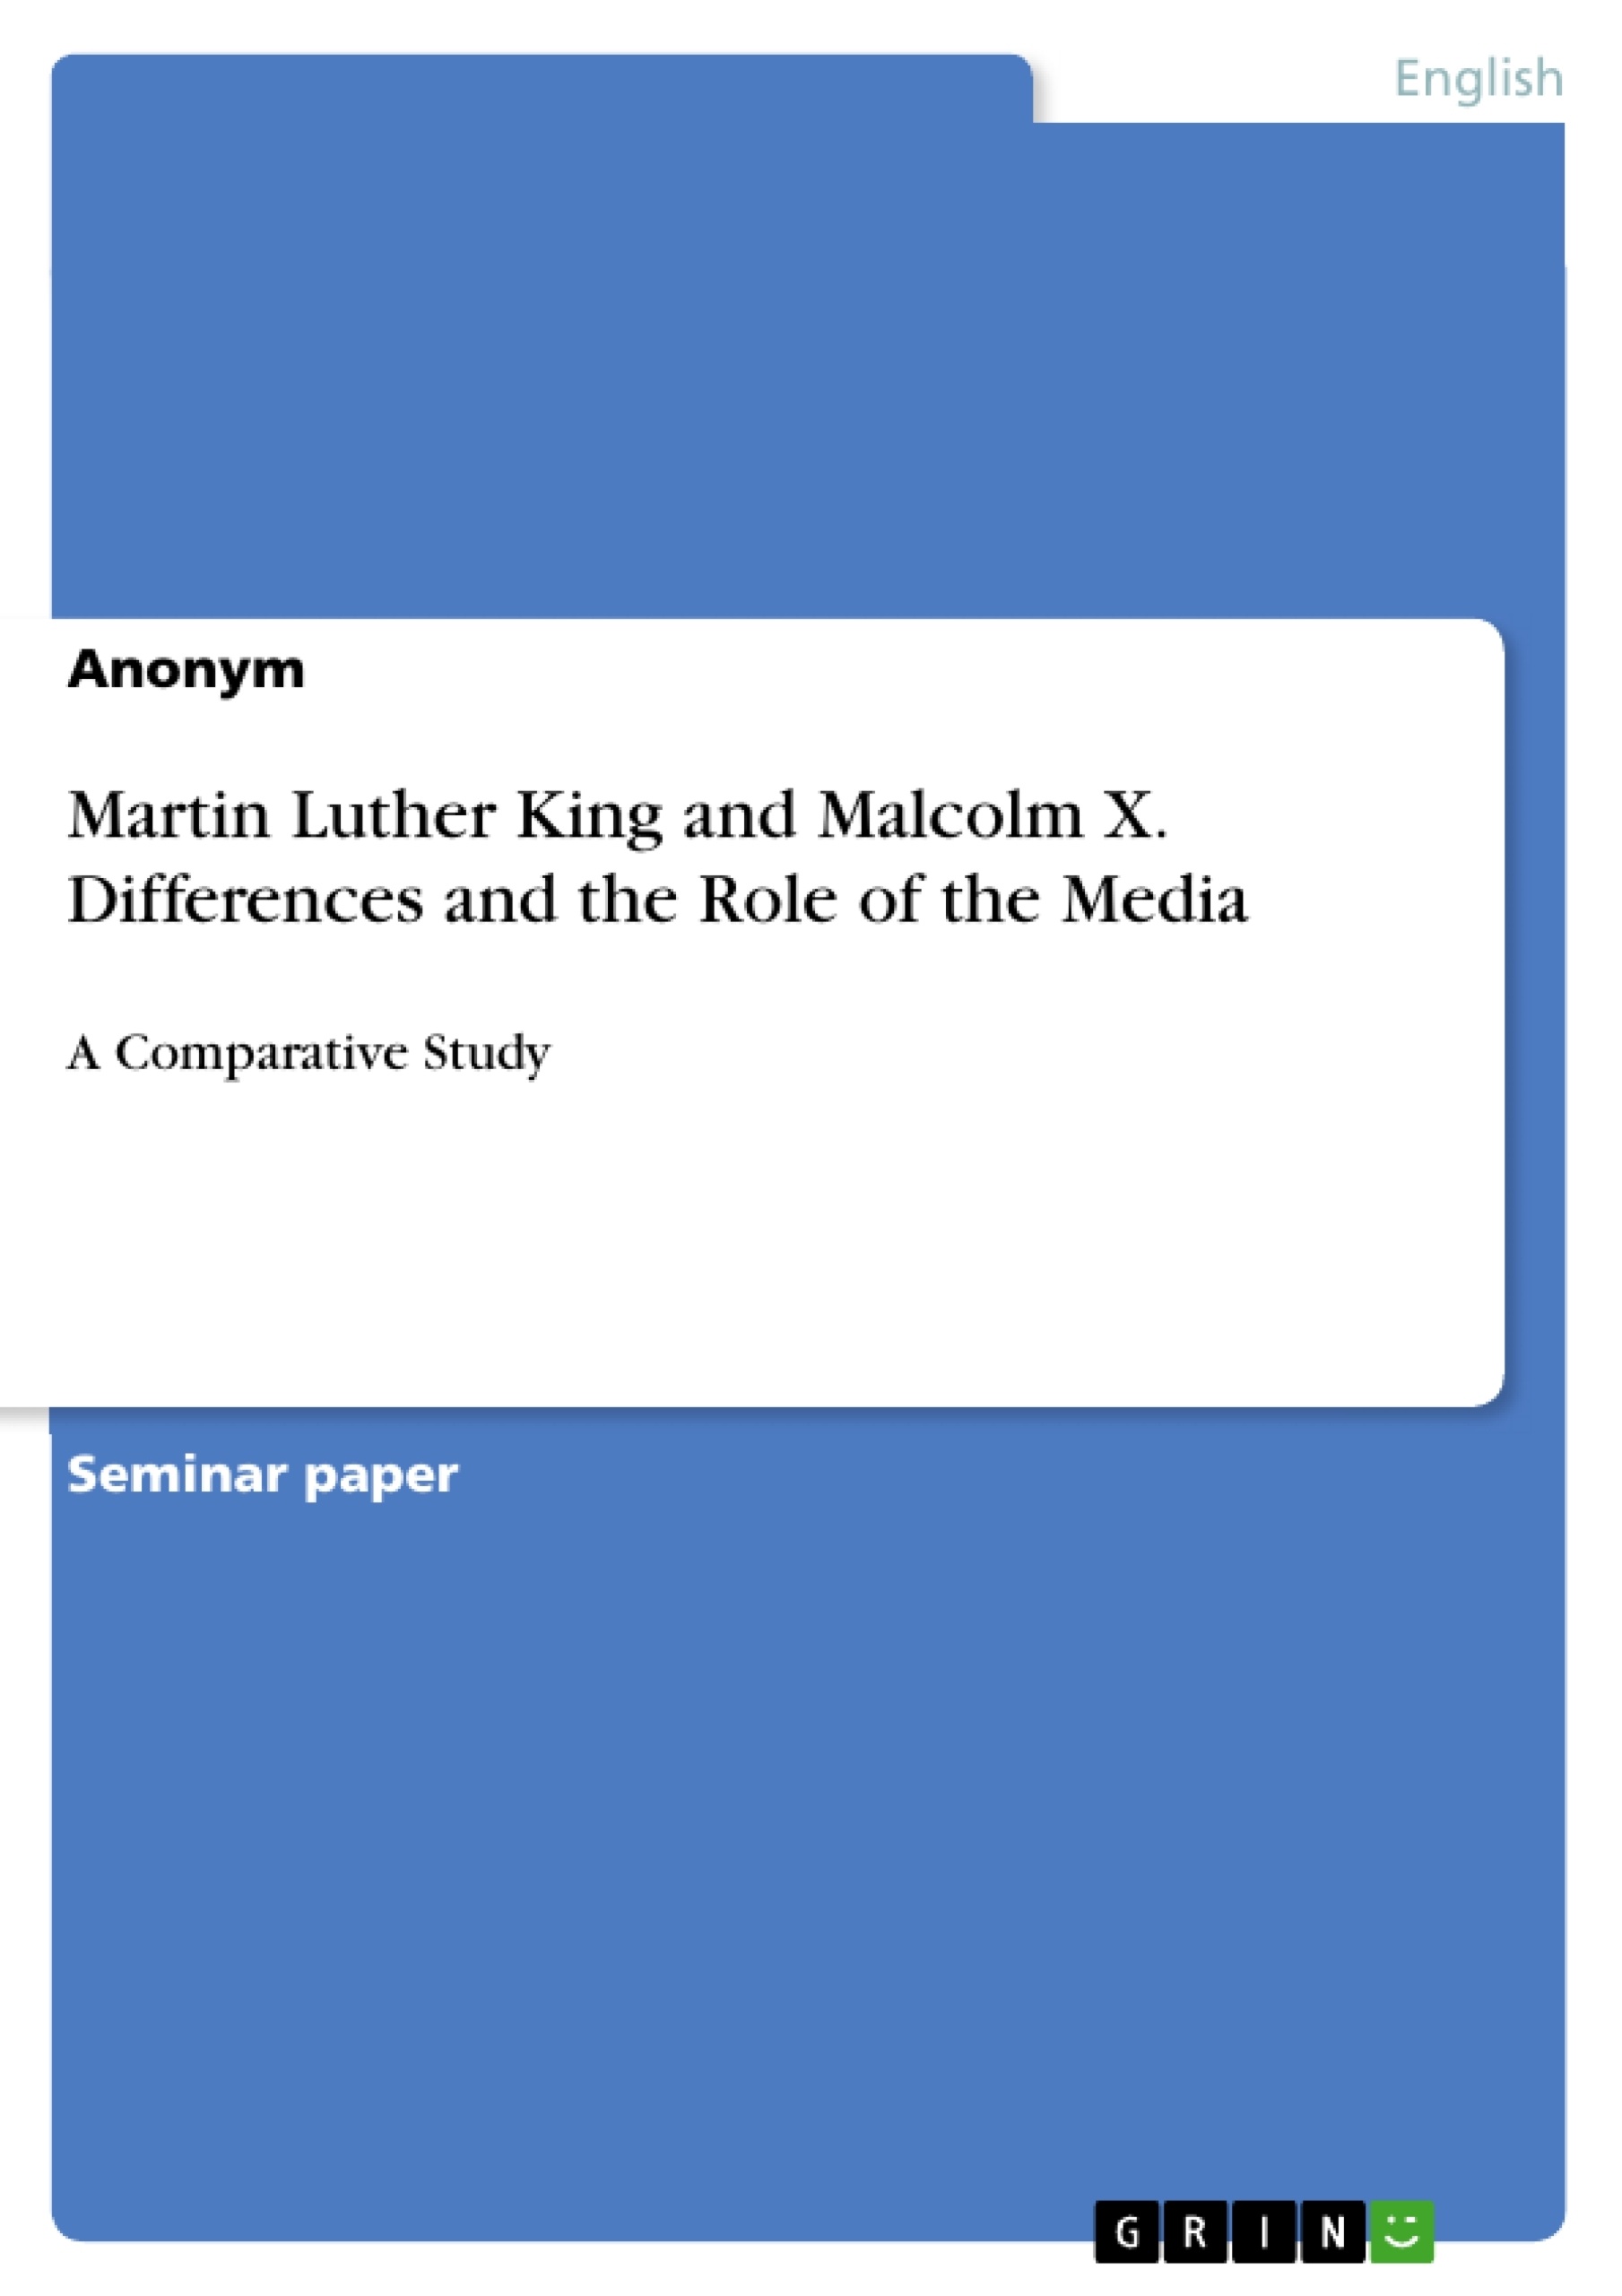 Título: Martin Luther King and Malcolm X. Differences and the Role of the Media